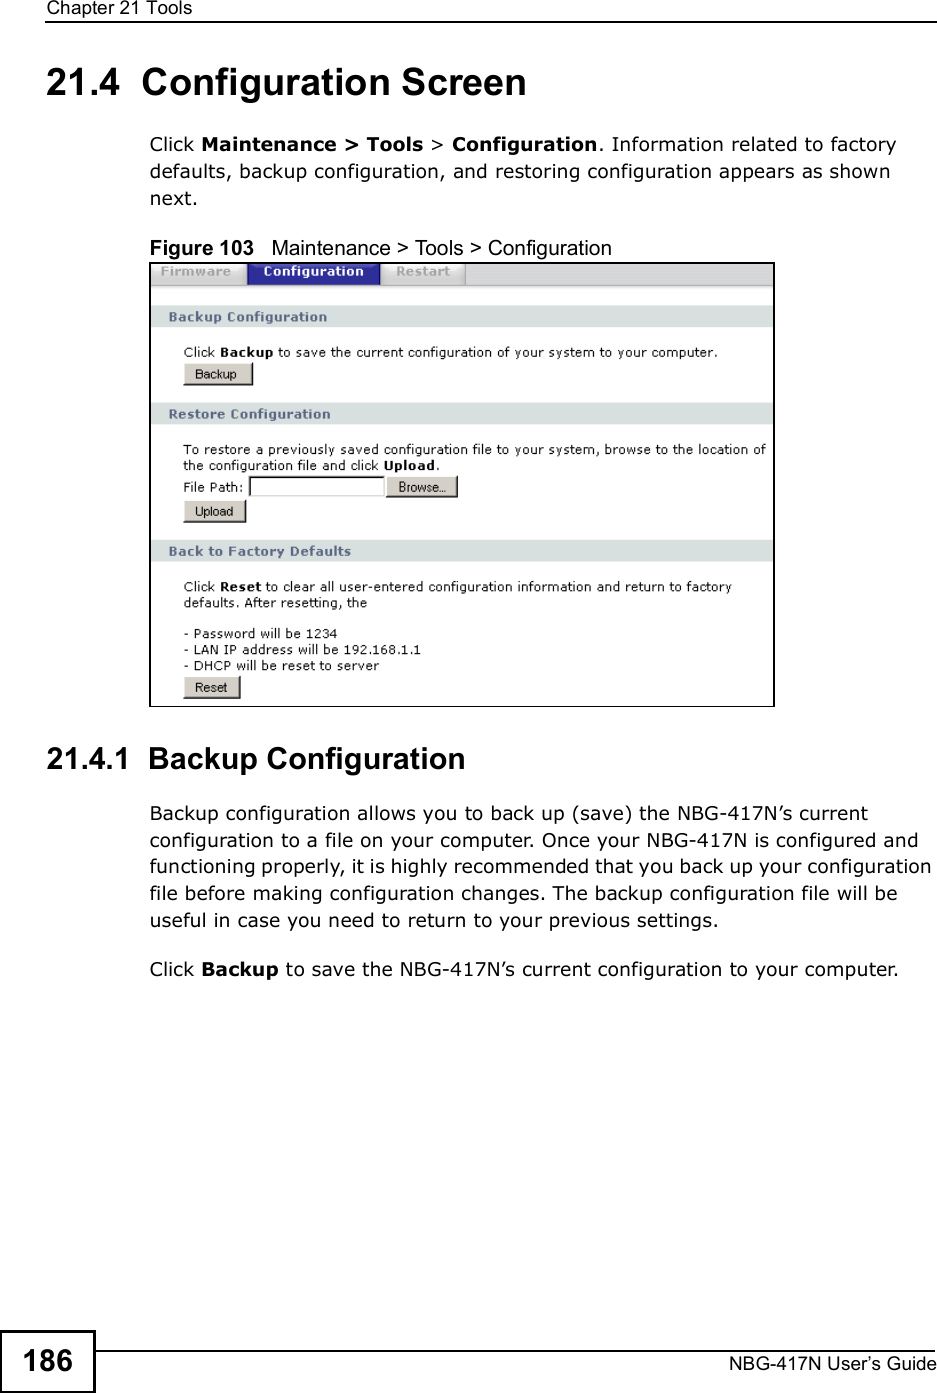 Chapter 21ToolsNBG-417N User s Guide18621.4  Configuration ScreenClick Maintenance &gt; Tools &gt; Configuration. Information related to factory defaults, backup configuration, and restoring configuration appears as shown next.Figure 103   Maintenance &gt; Tools &gt; Configuration 21.4.1  Backup ConfigurationBackup configuration allows you to back up (save) the NBG-417N!s current configuration to a file on your computer. Once your NBG-417N is configured and functioning properly, it is highly recommended that you back up your configuration file before making configuration changes. The backup configuration file will be useful in case you need to return to your previous settings. Click Backup to save the NBG-417N!s current configuration to your computer.